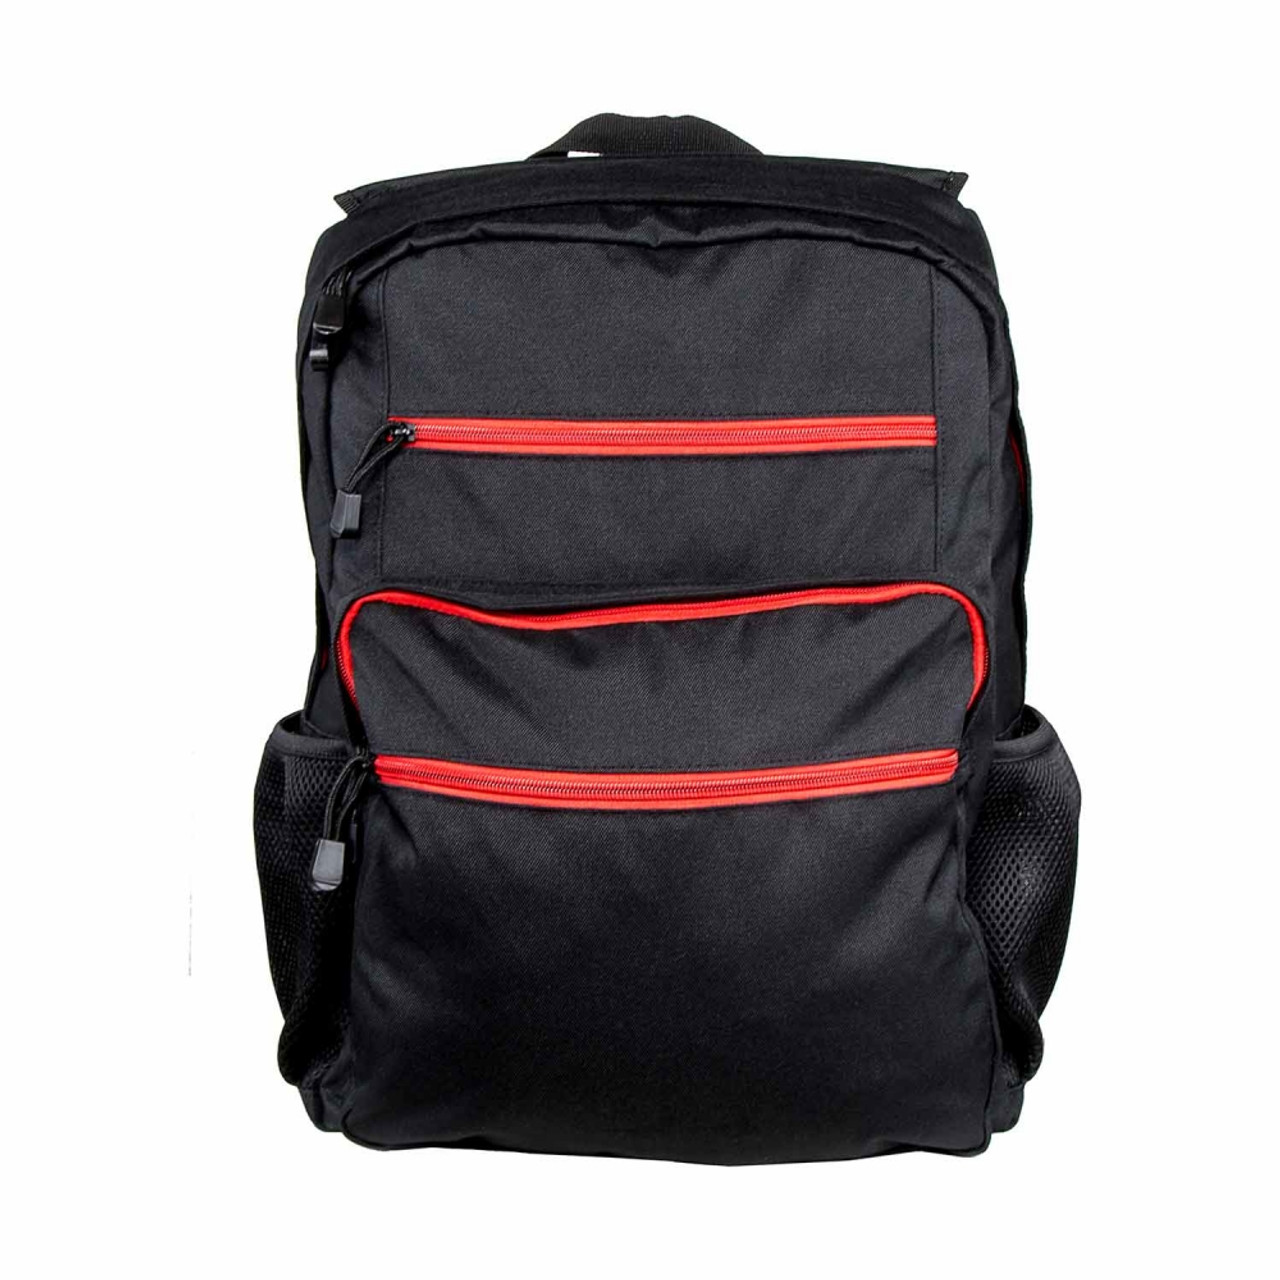 NcSTAR BGBPS3003B Guardianpack Backpack With Front And Rear Compartment For Soft Body Armor (Not Included)